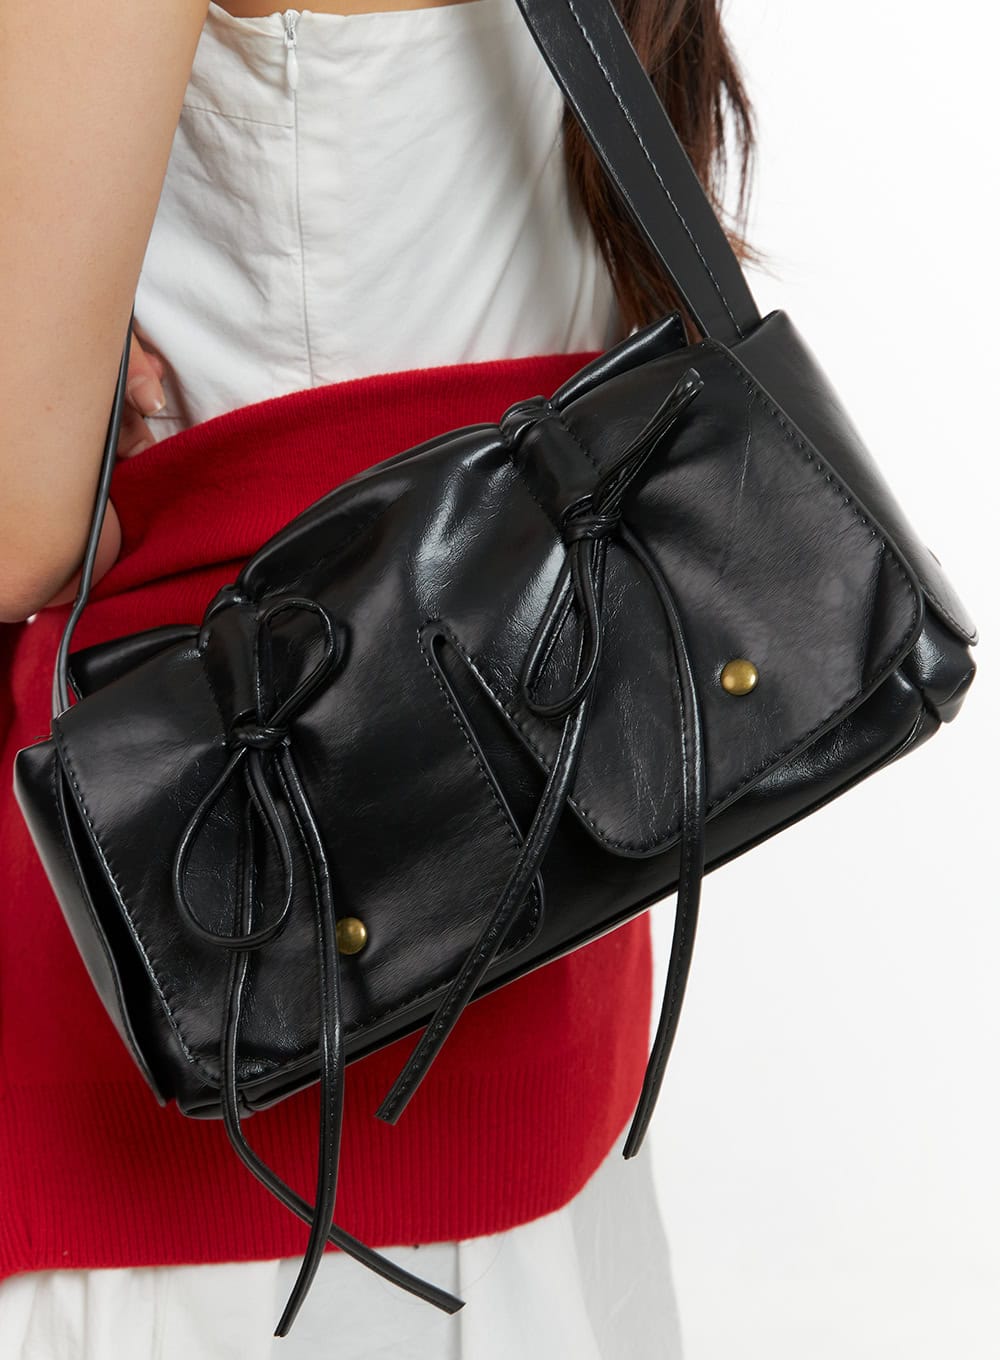 bowknot-leather-shoulder-bag-cy417